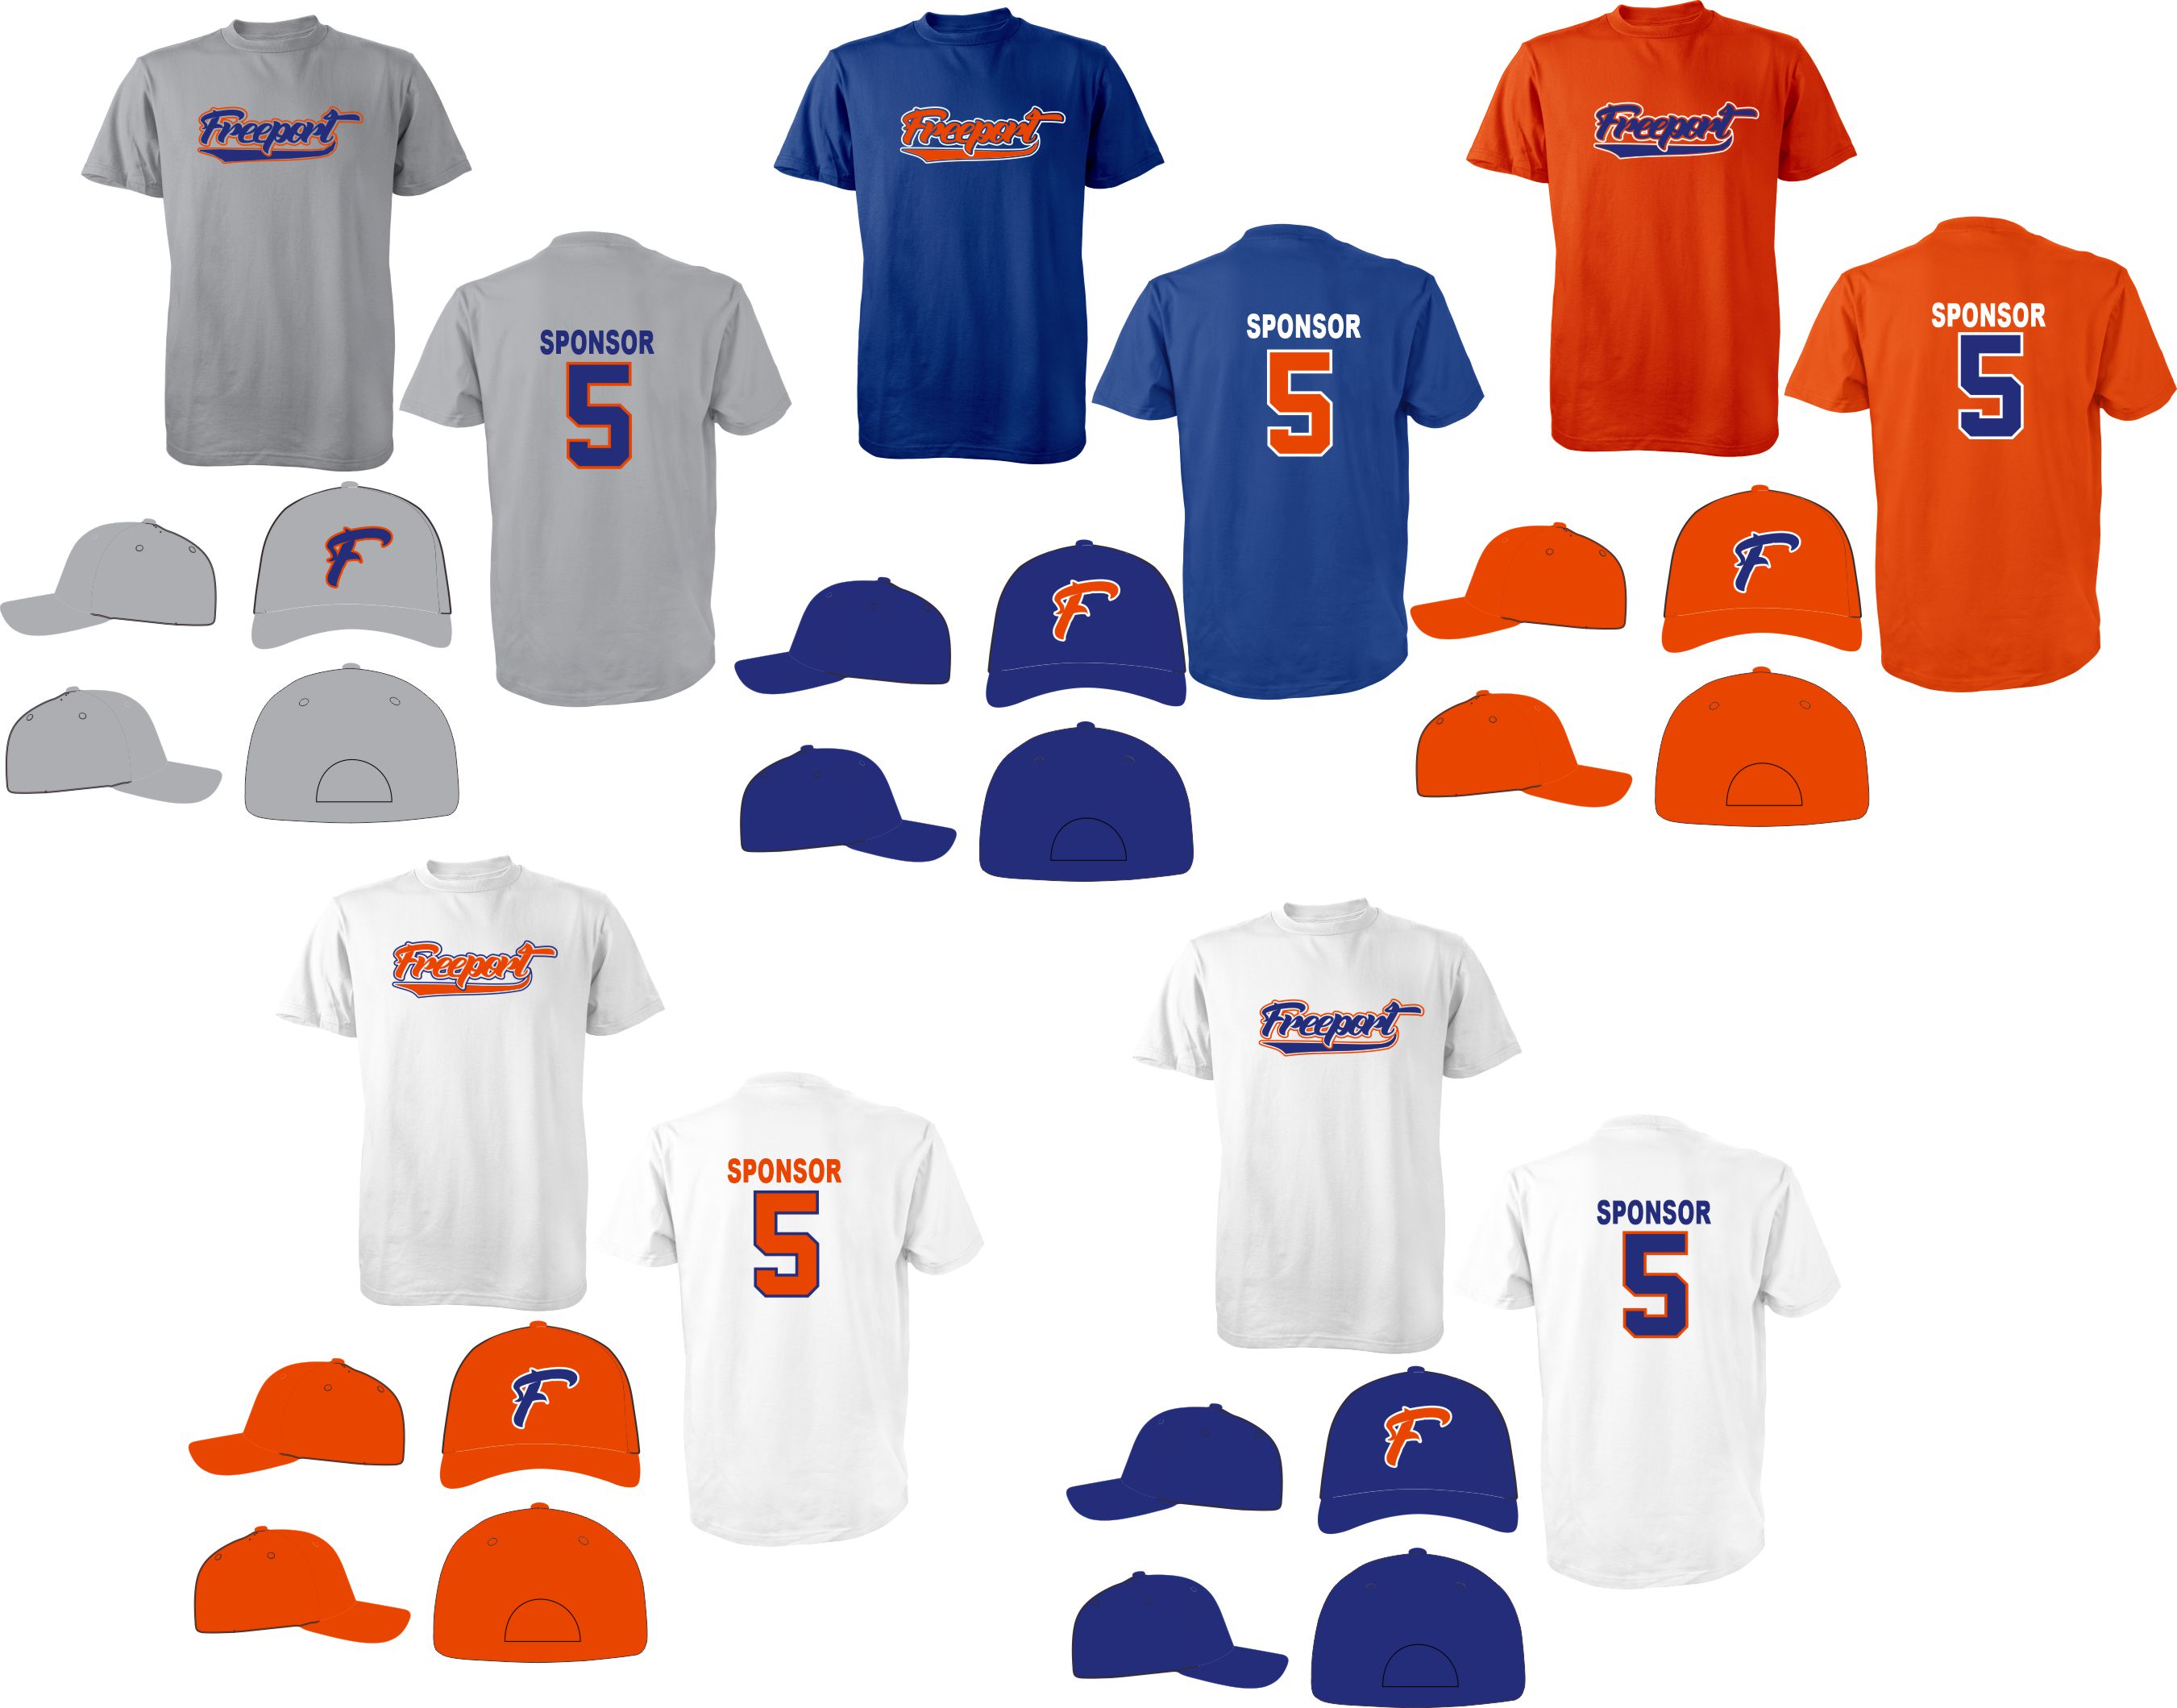 Freeport Little League Jerseys in orange, blue, and grey color combos